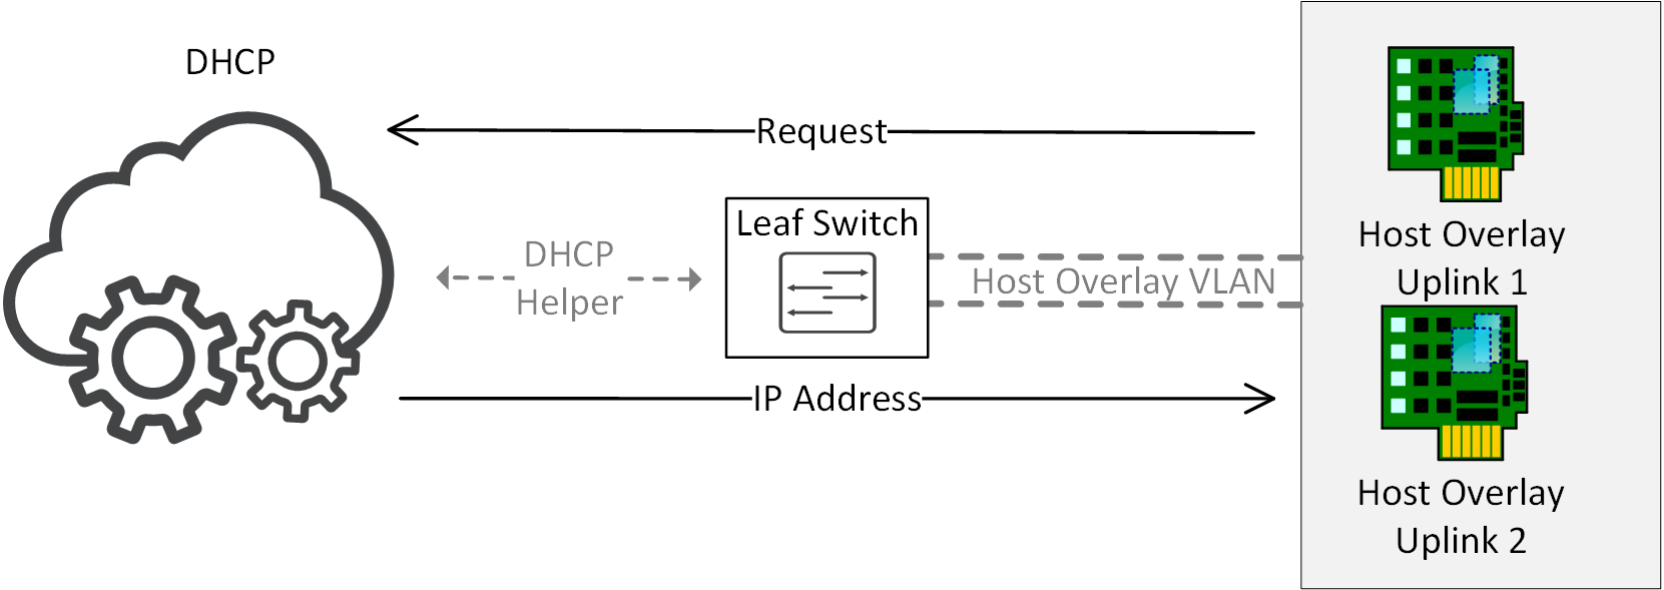 This figure shows how DHCP services are connected to host overlay VLAN.